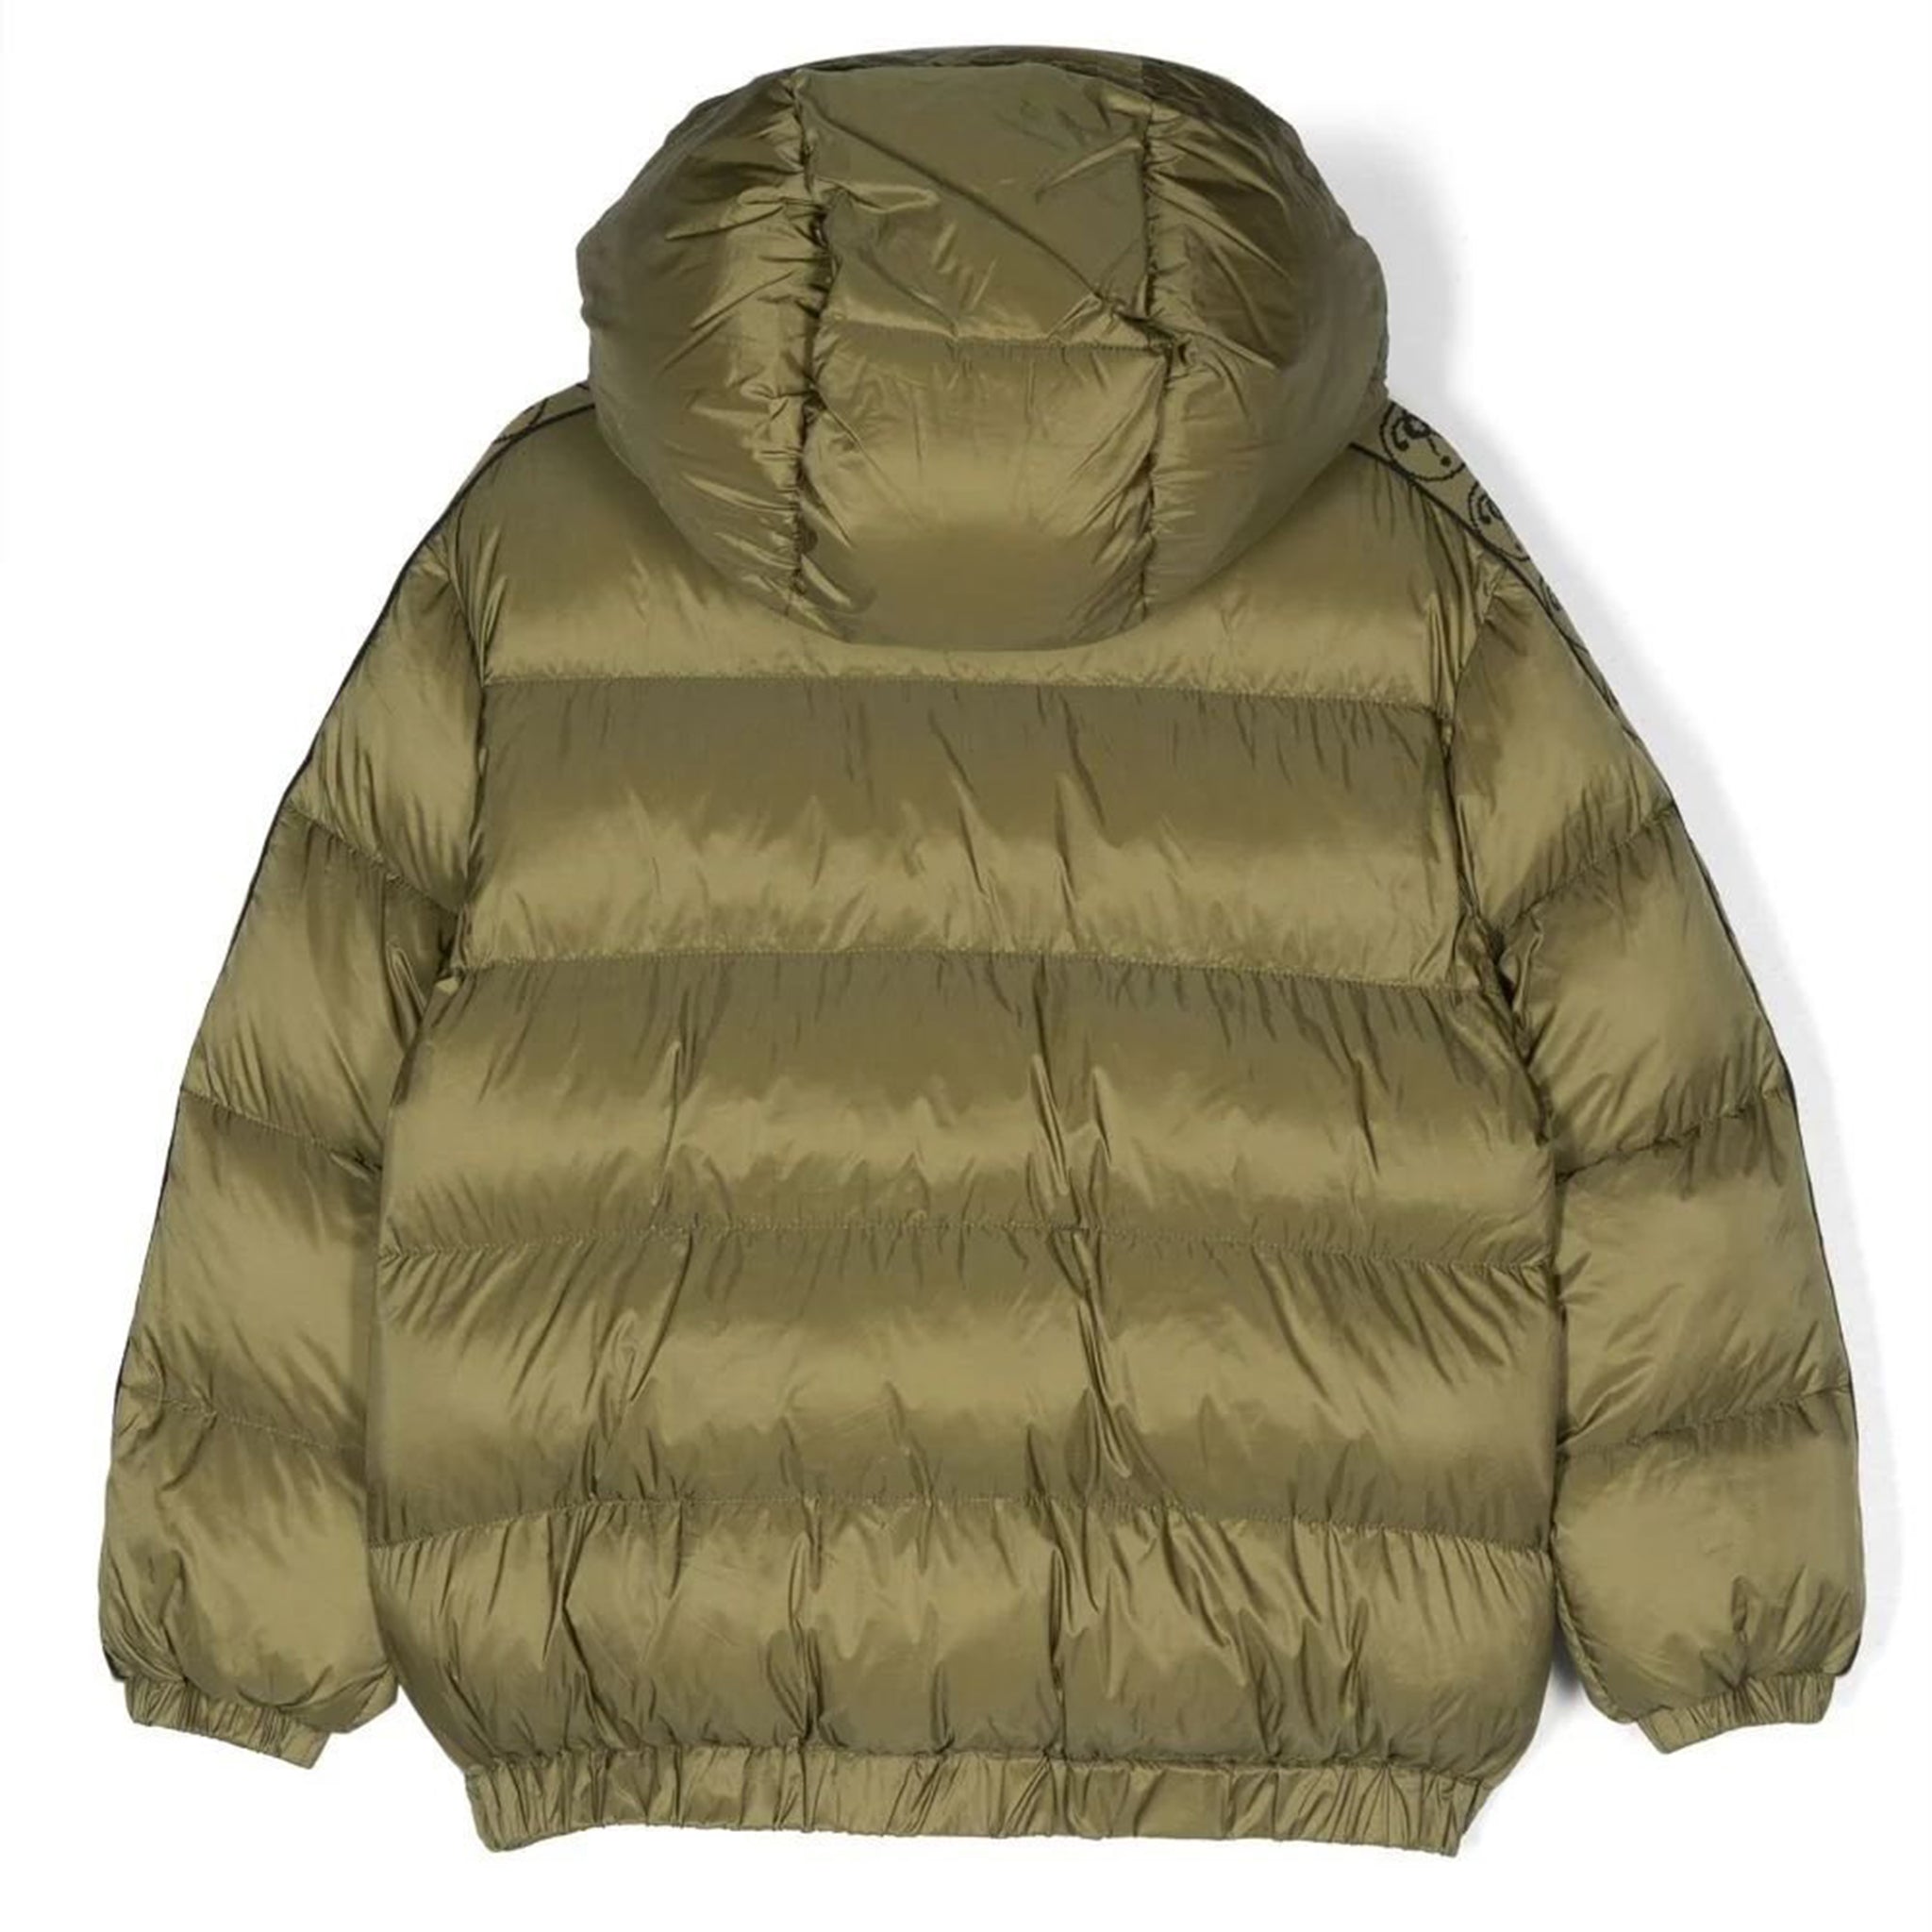 Moschino Tape Logo Jacket in Olive Green